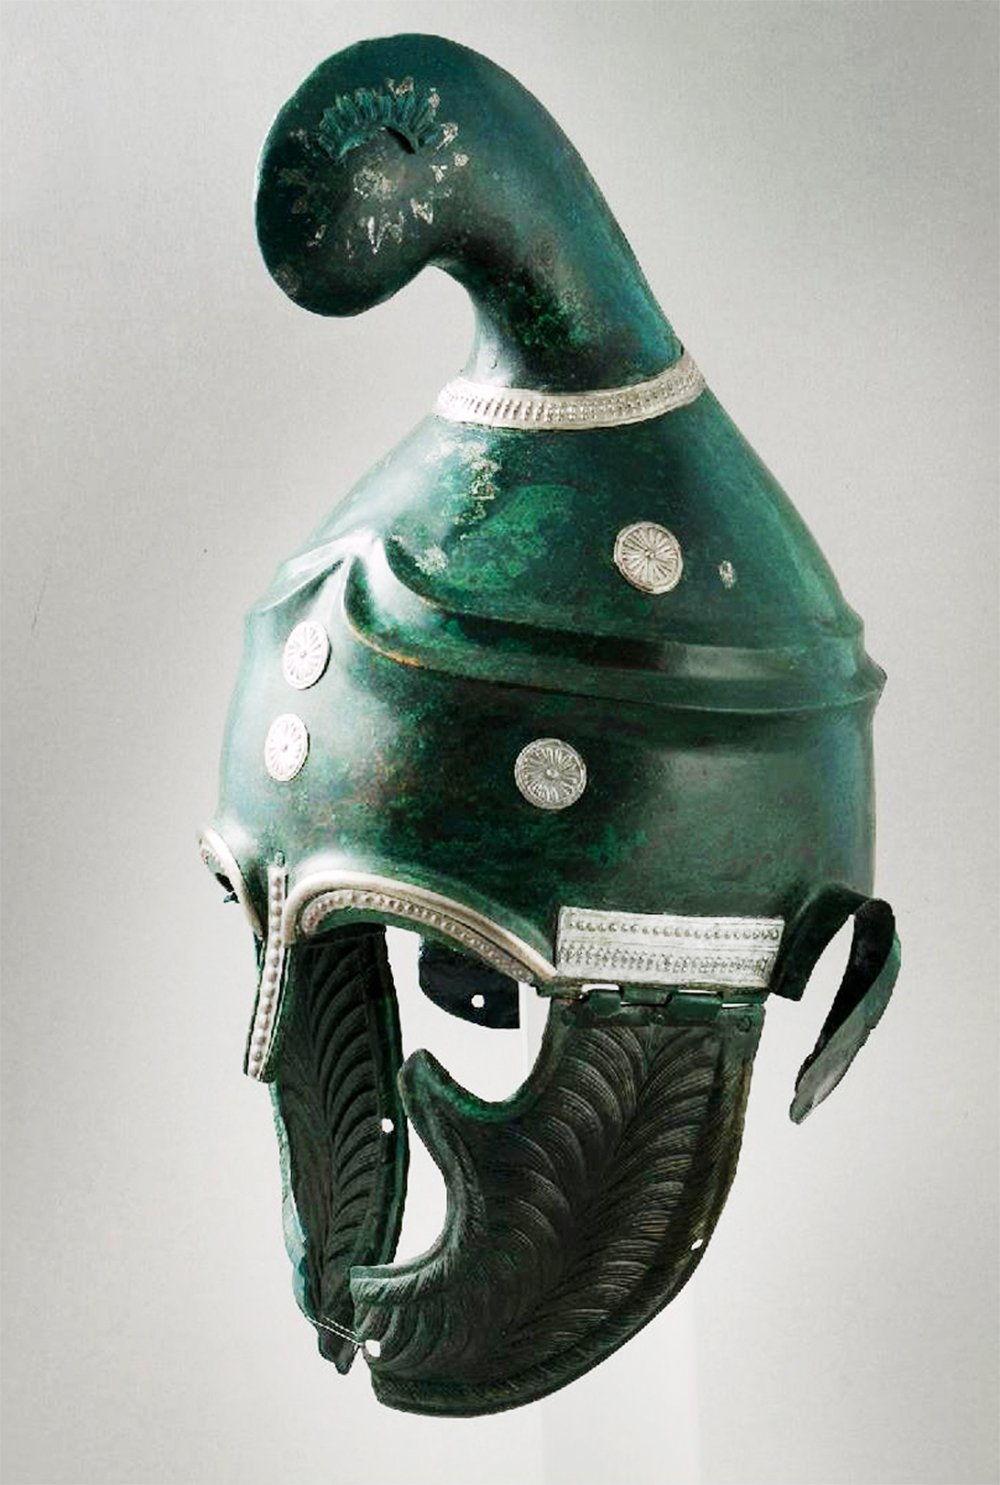 Close-up of a 4th century BC Thracian-type helmet made of greenish-bronze, adorned with intricate silver detailing. The helmet features a tall, curved crest on top and ornate feather-like cheek guards. Decorative round medallions and silvered edging add to the helmet's elegance.